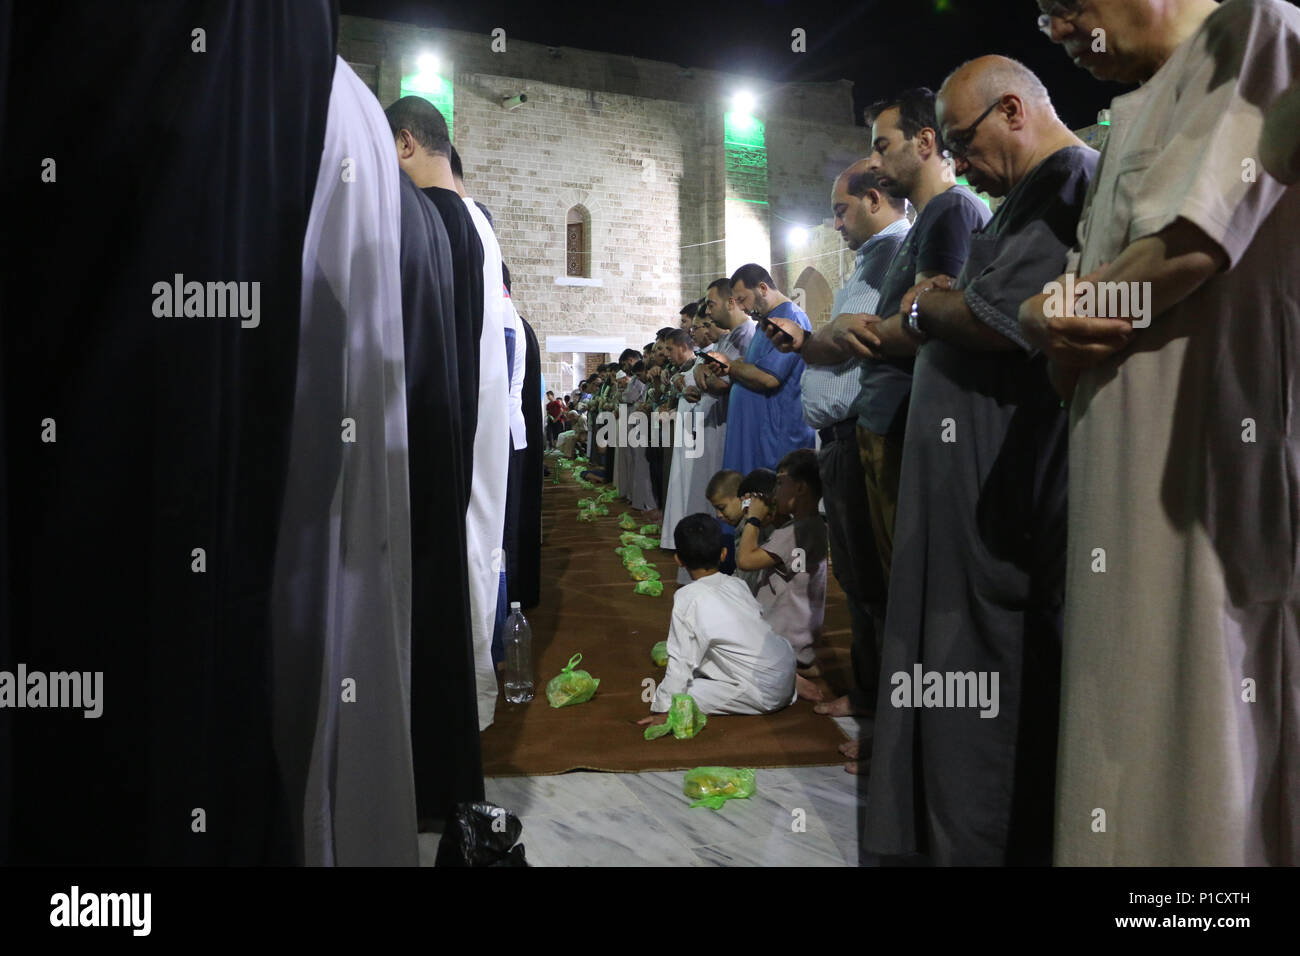 Muslims seen performing prayers during the ramadan. Palestinian worshippers attend a night prayer during Laylat Al-Qadr, on the 27th day of the holy fasting month of Ramadan at al-Omari mosque in Gaza City. Laylat Al-Qadr is the holiest night in the Ramadan month which commemorates the revealing of the holy book of Quran to Prophet. Stock Photo